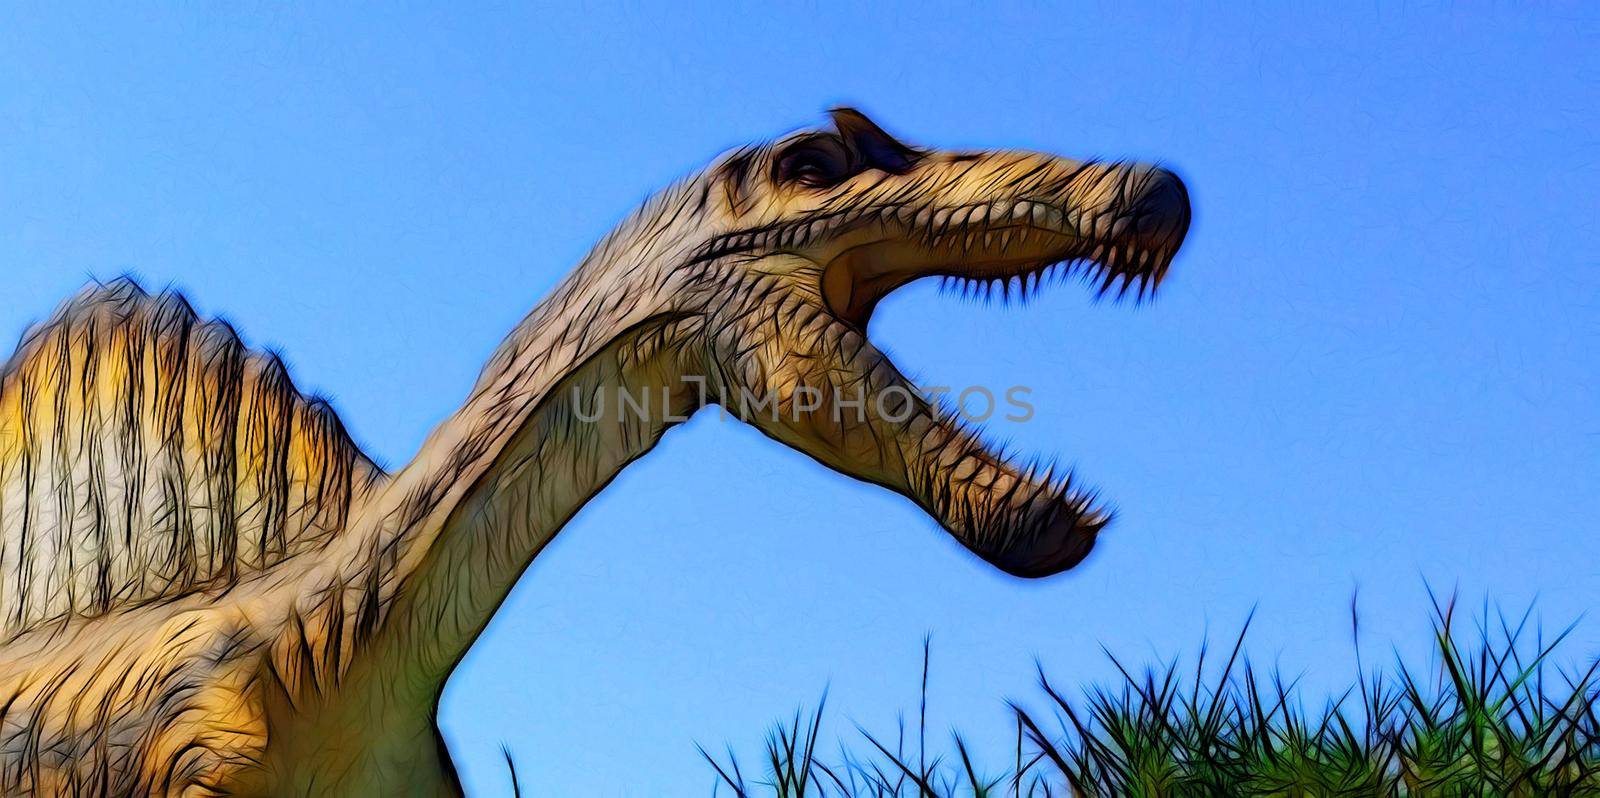 Digital color painting style representing a spinosaurus